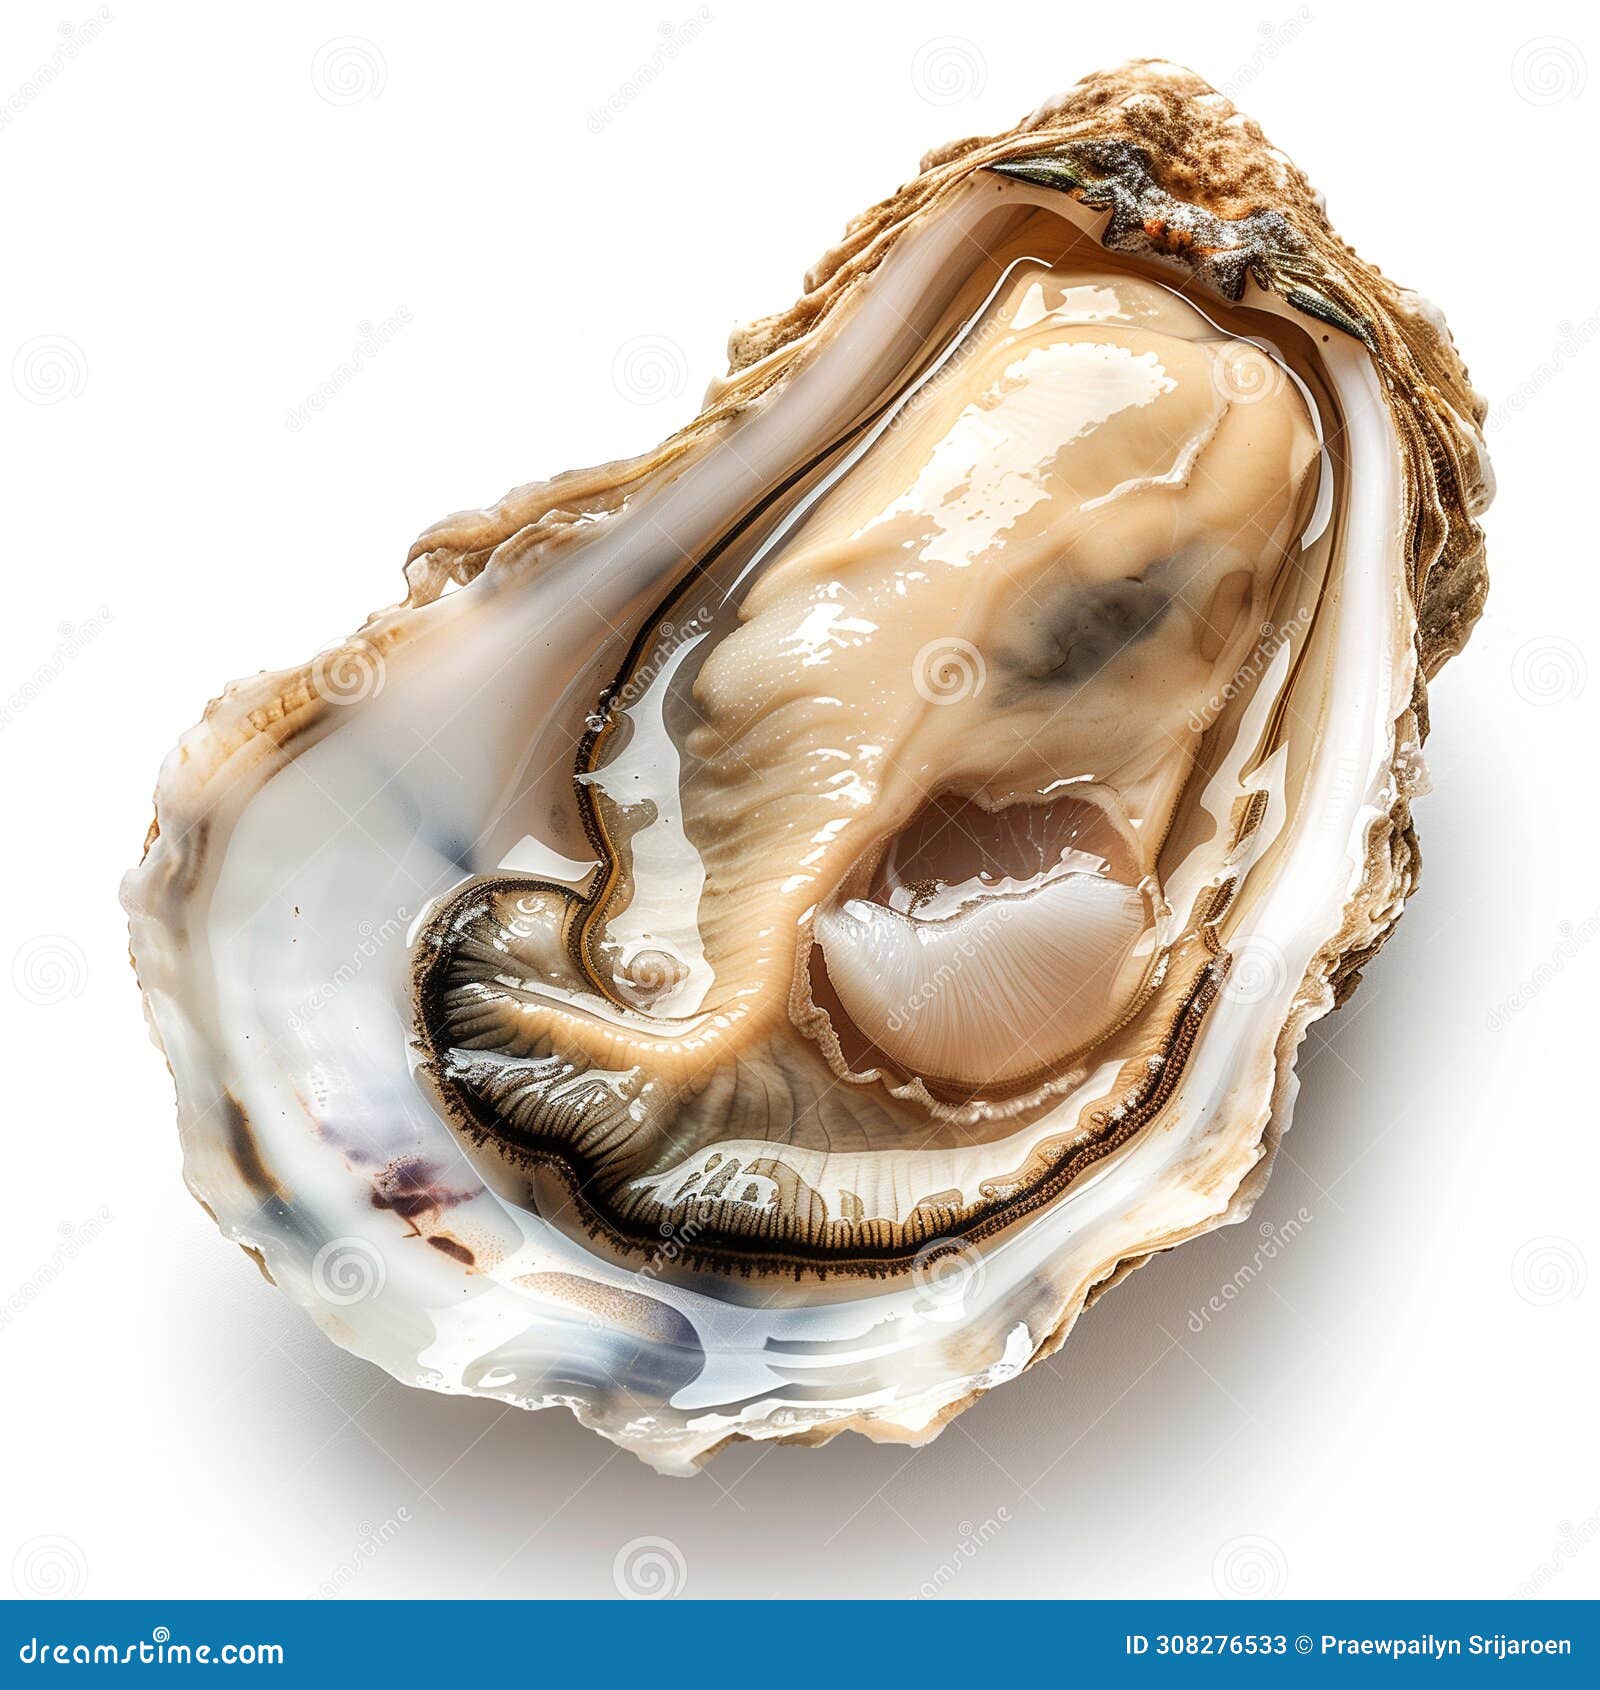 a detailed close-up of a freshly opened oyster, presenting its natural texture and briny essence, set against a white backdrop